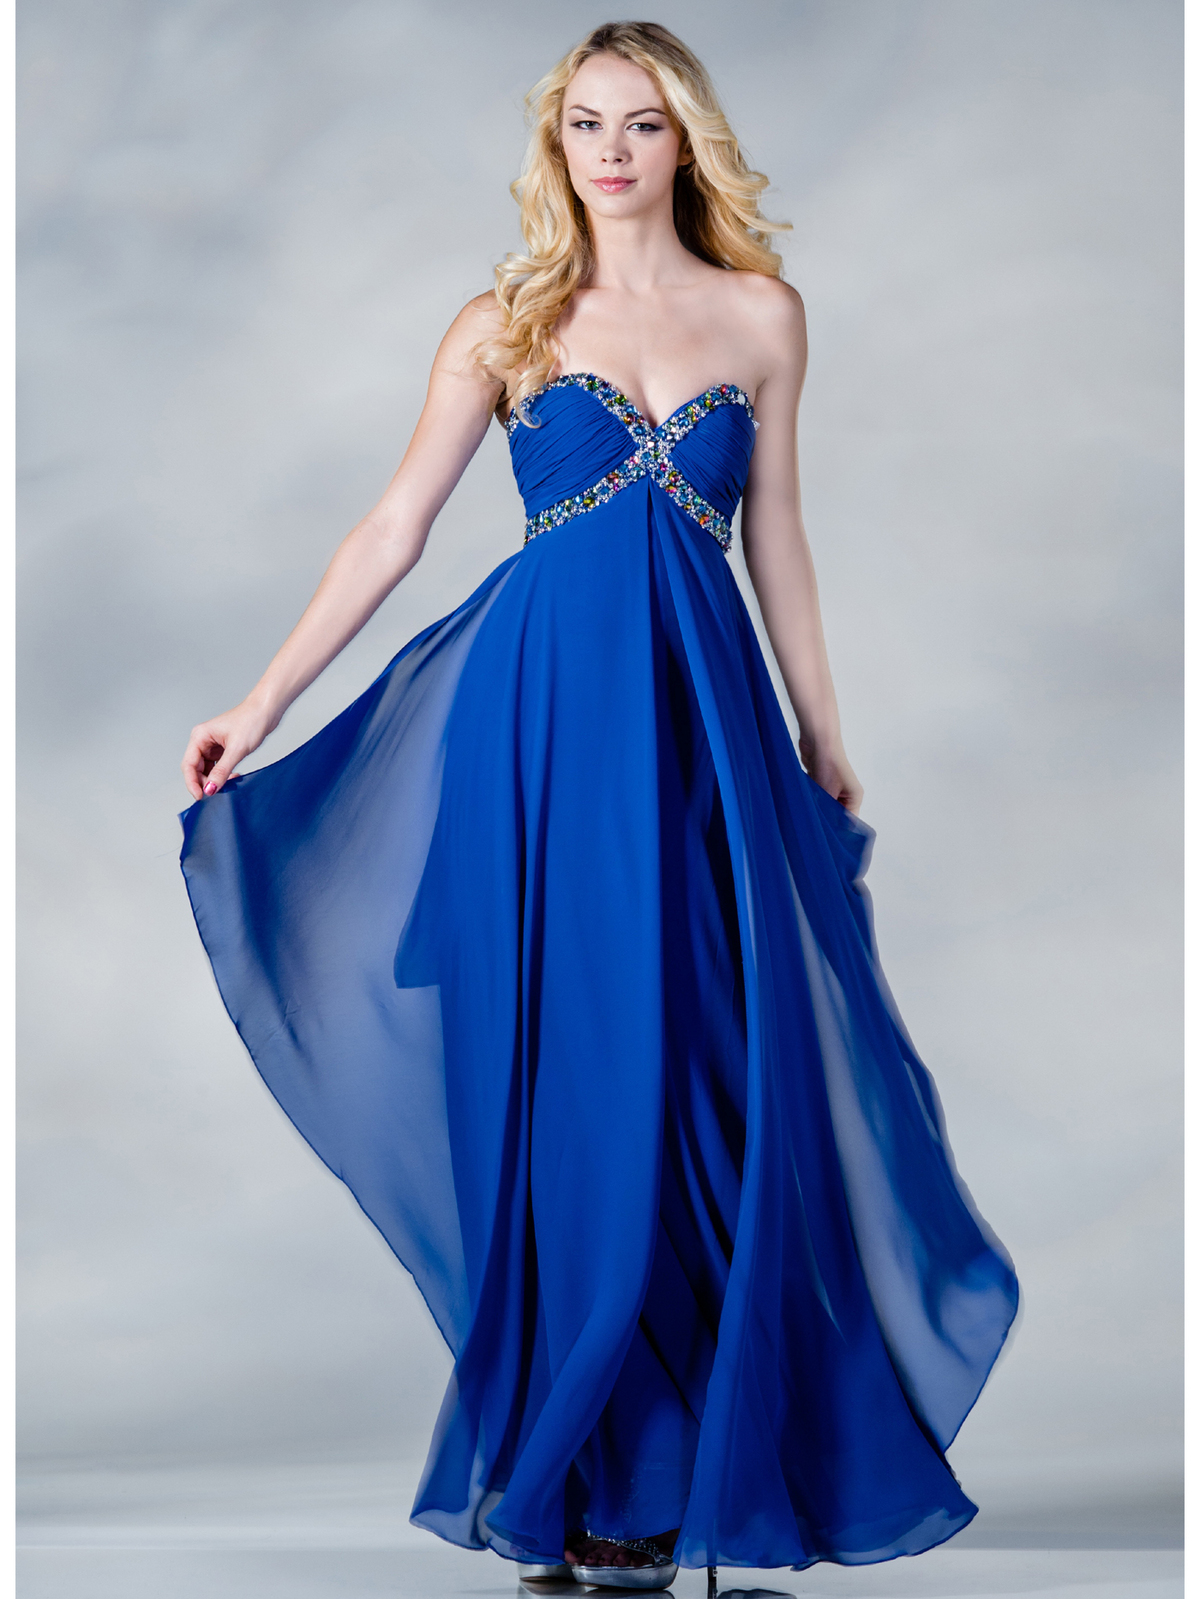 Royal Blue Prom Dresses With Straps Images & Pictures - Becuo